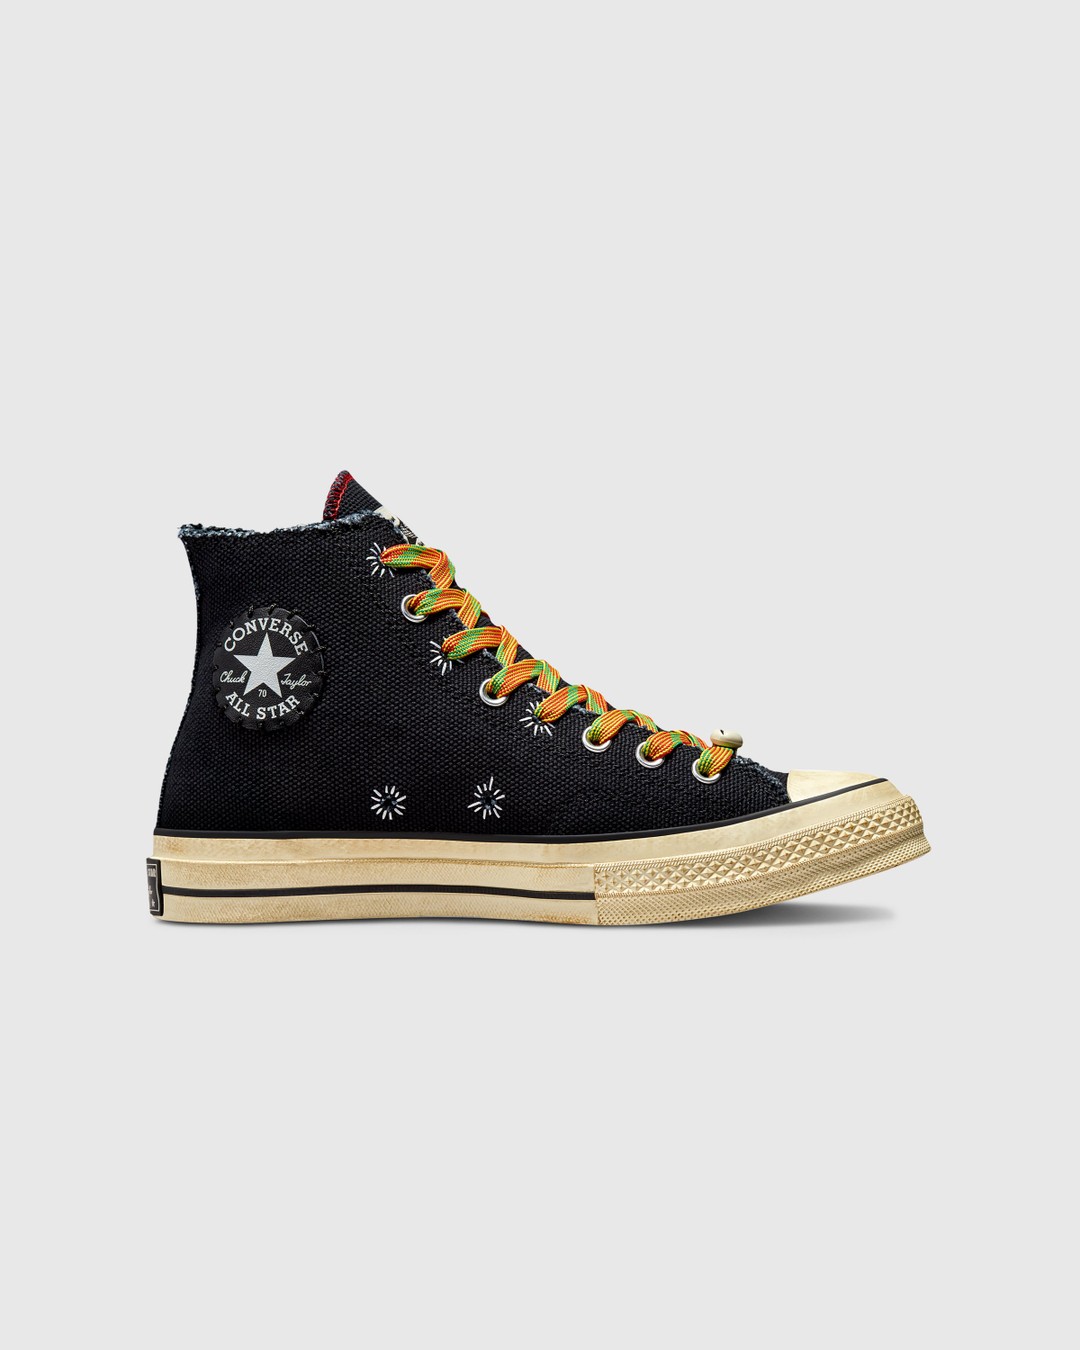 Converse x Barriers – Chuck 70 Hi Black/Fiery Red - High Top Sneakers - Black - Image 1